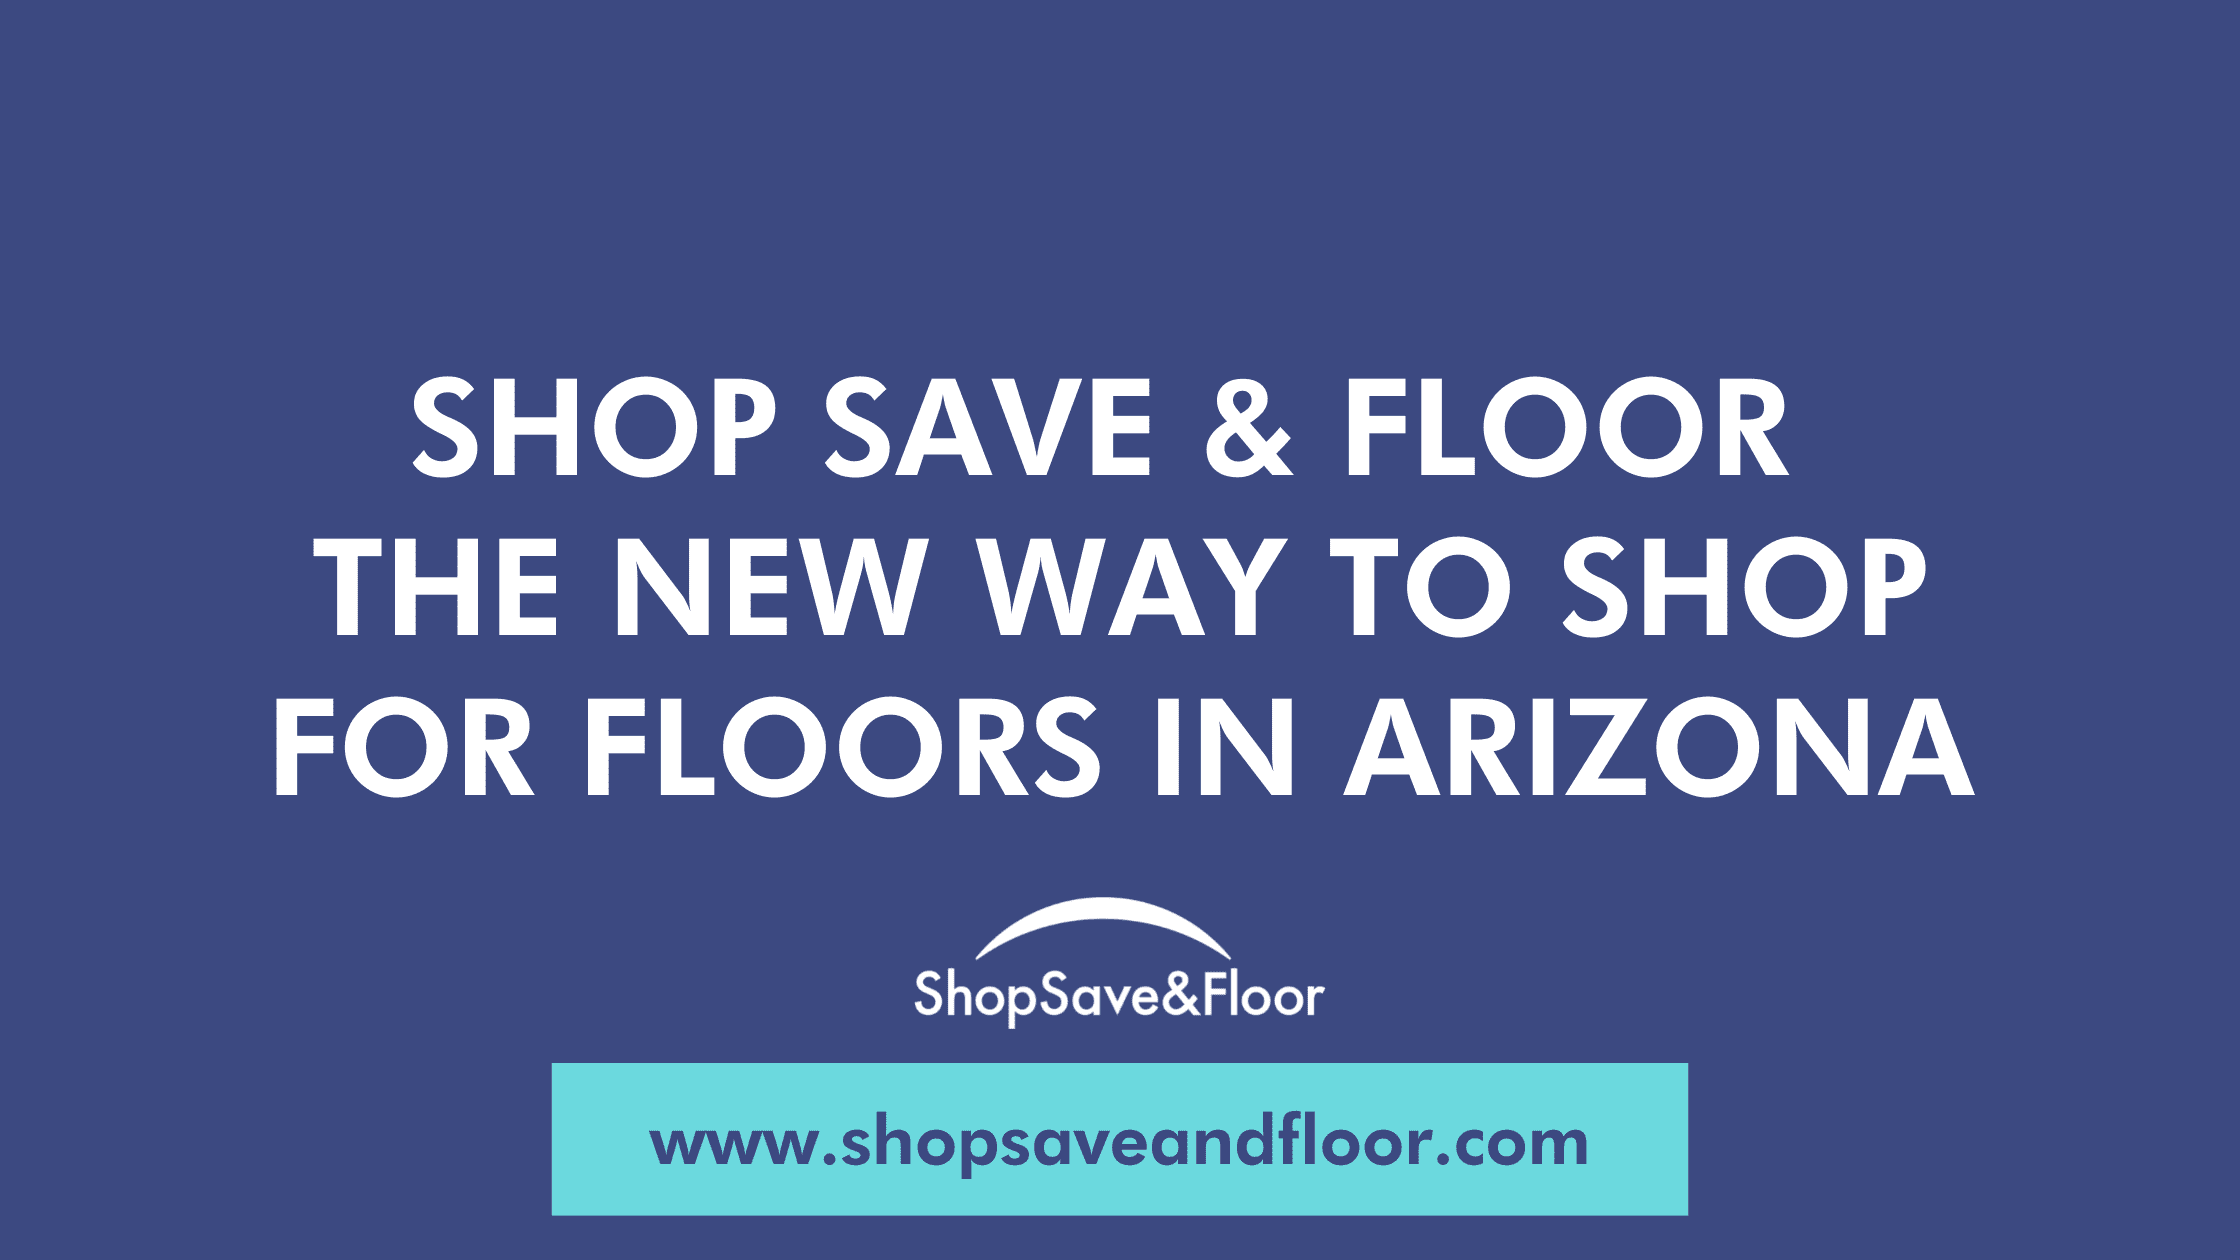 The New Way To Shop For Floors In Arizona